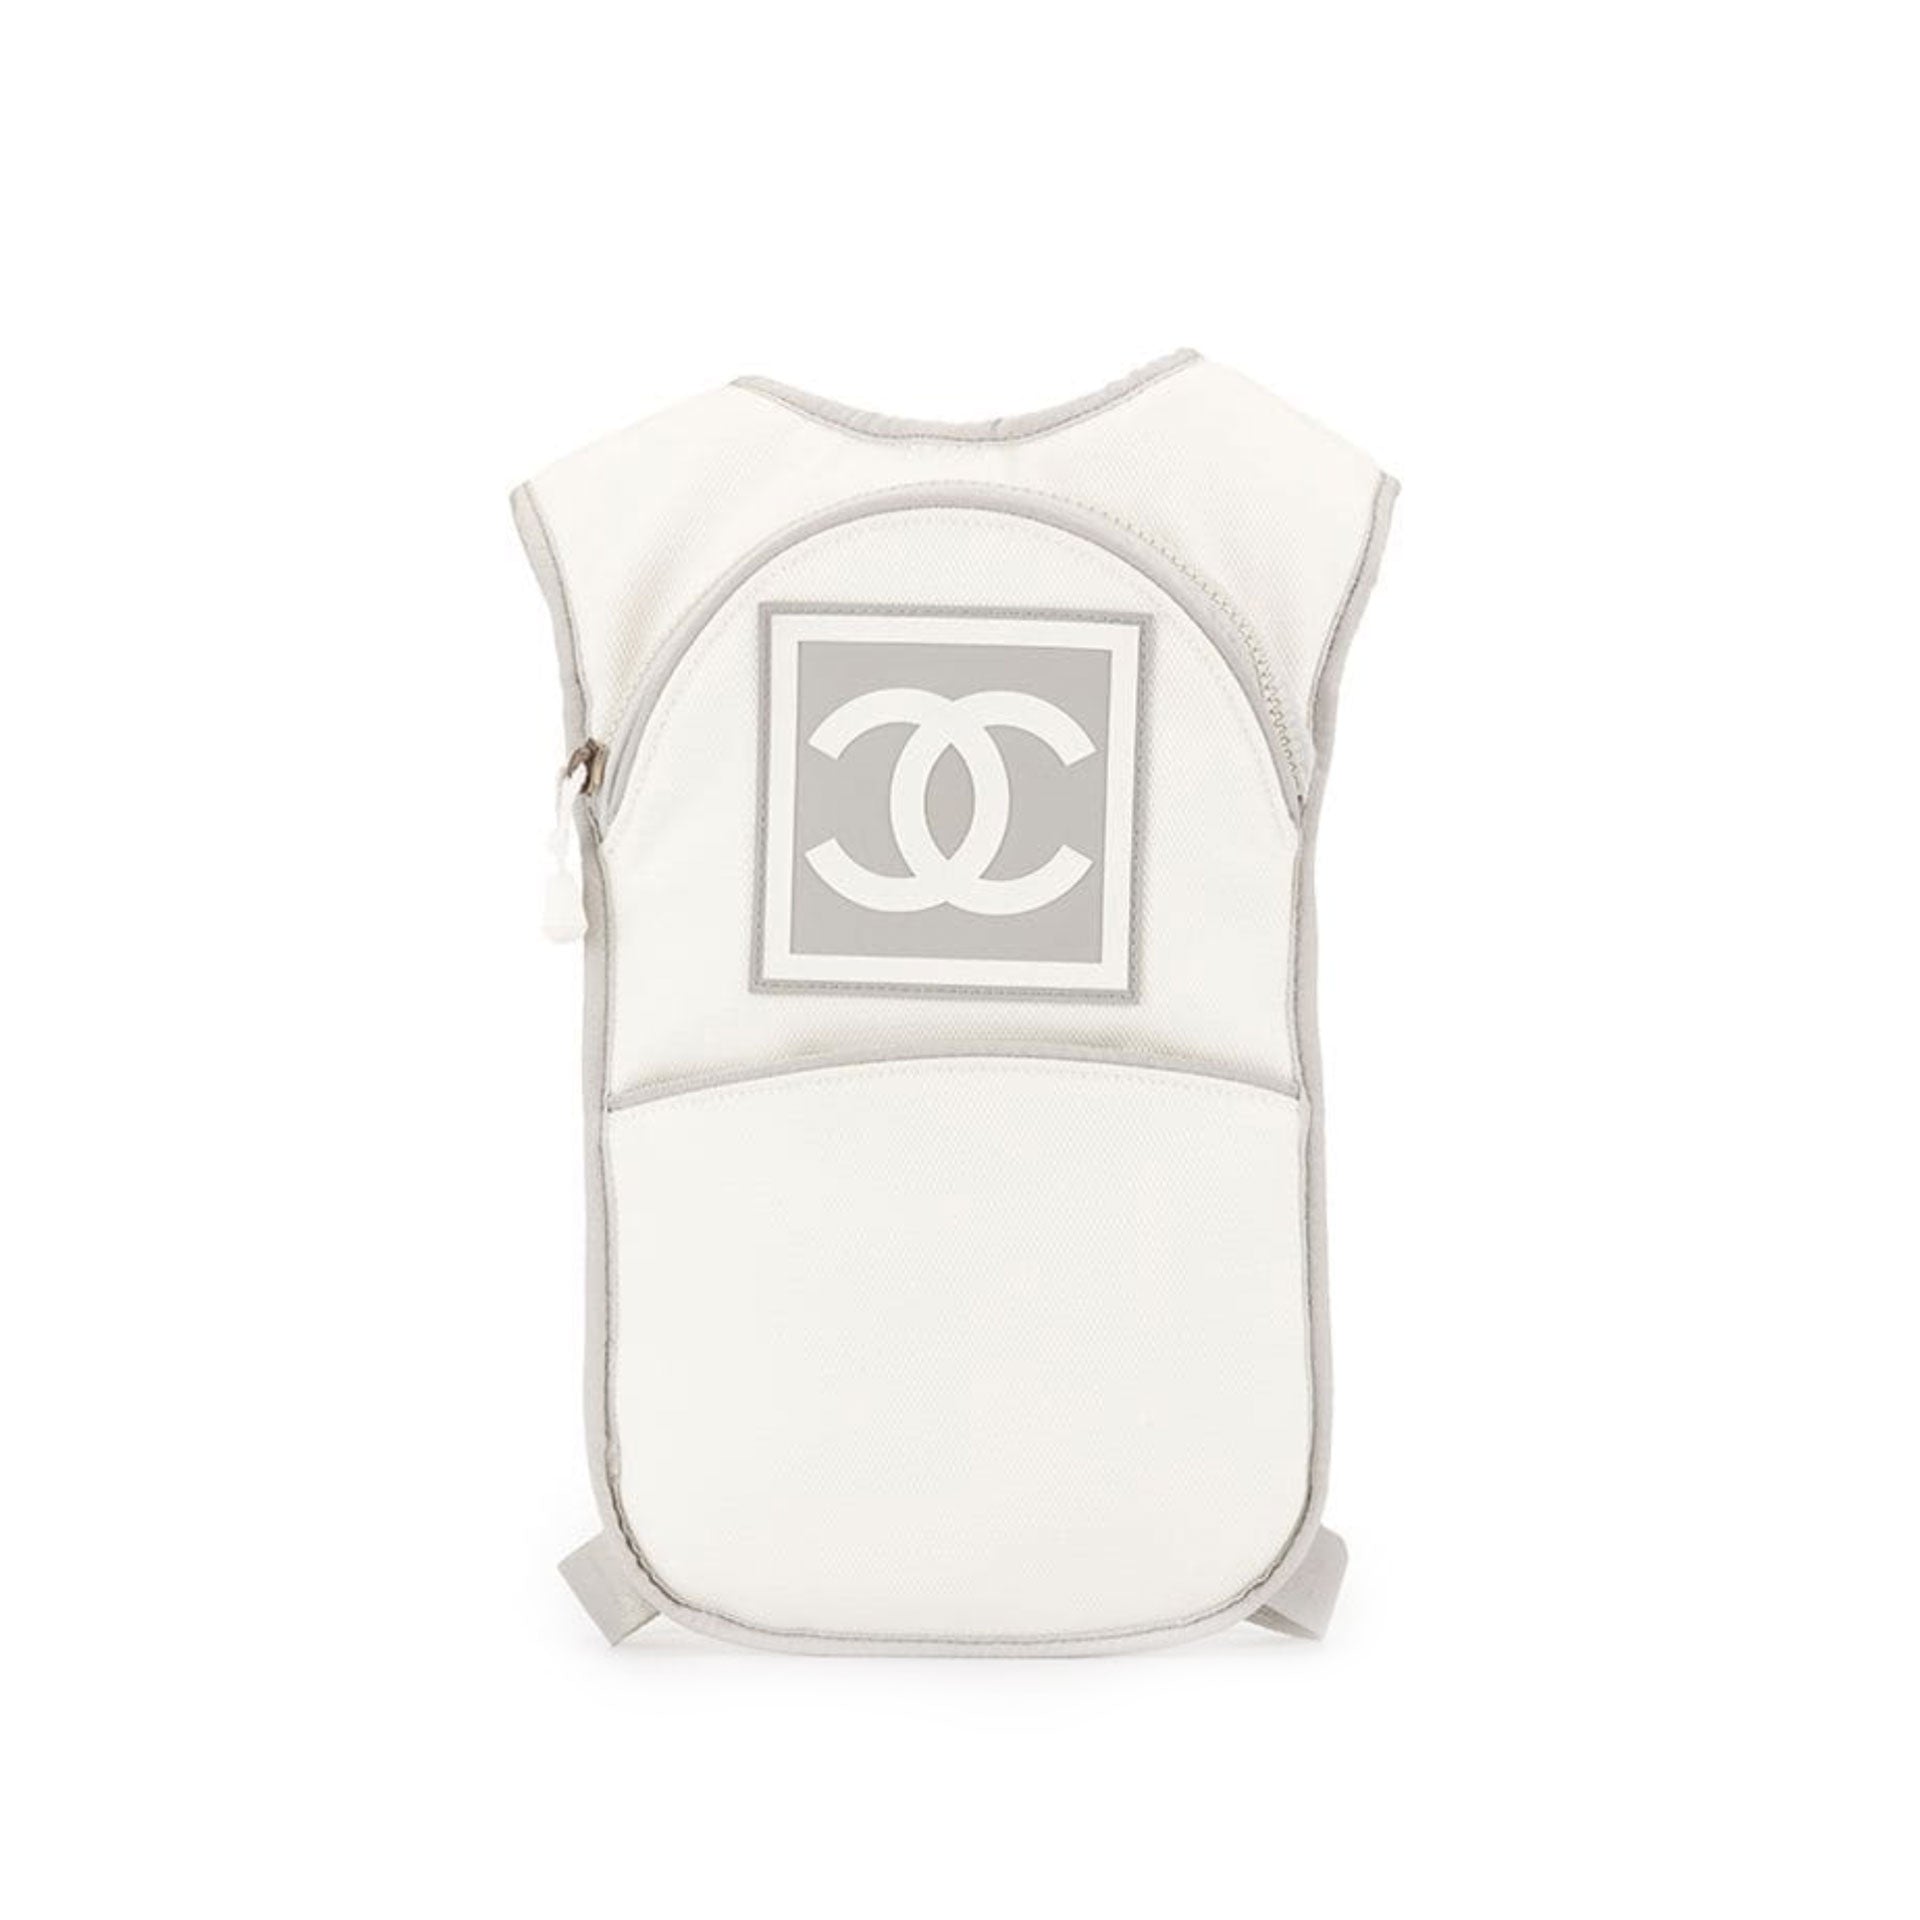 CHANEL Backpack White Bags & Handbags for Women, Authenticity Guaranteed